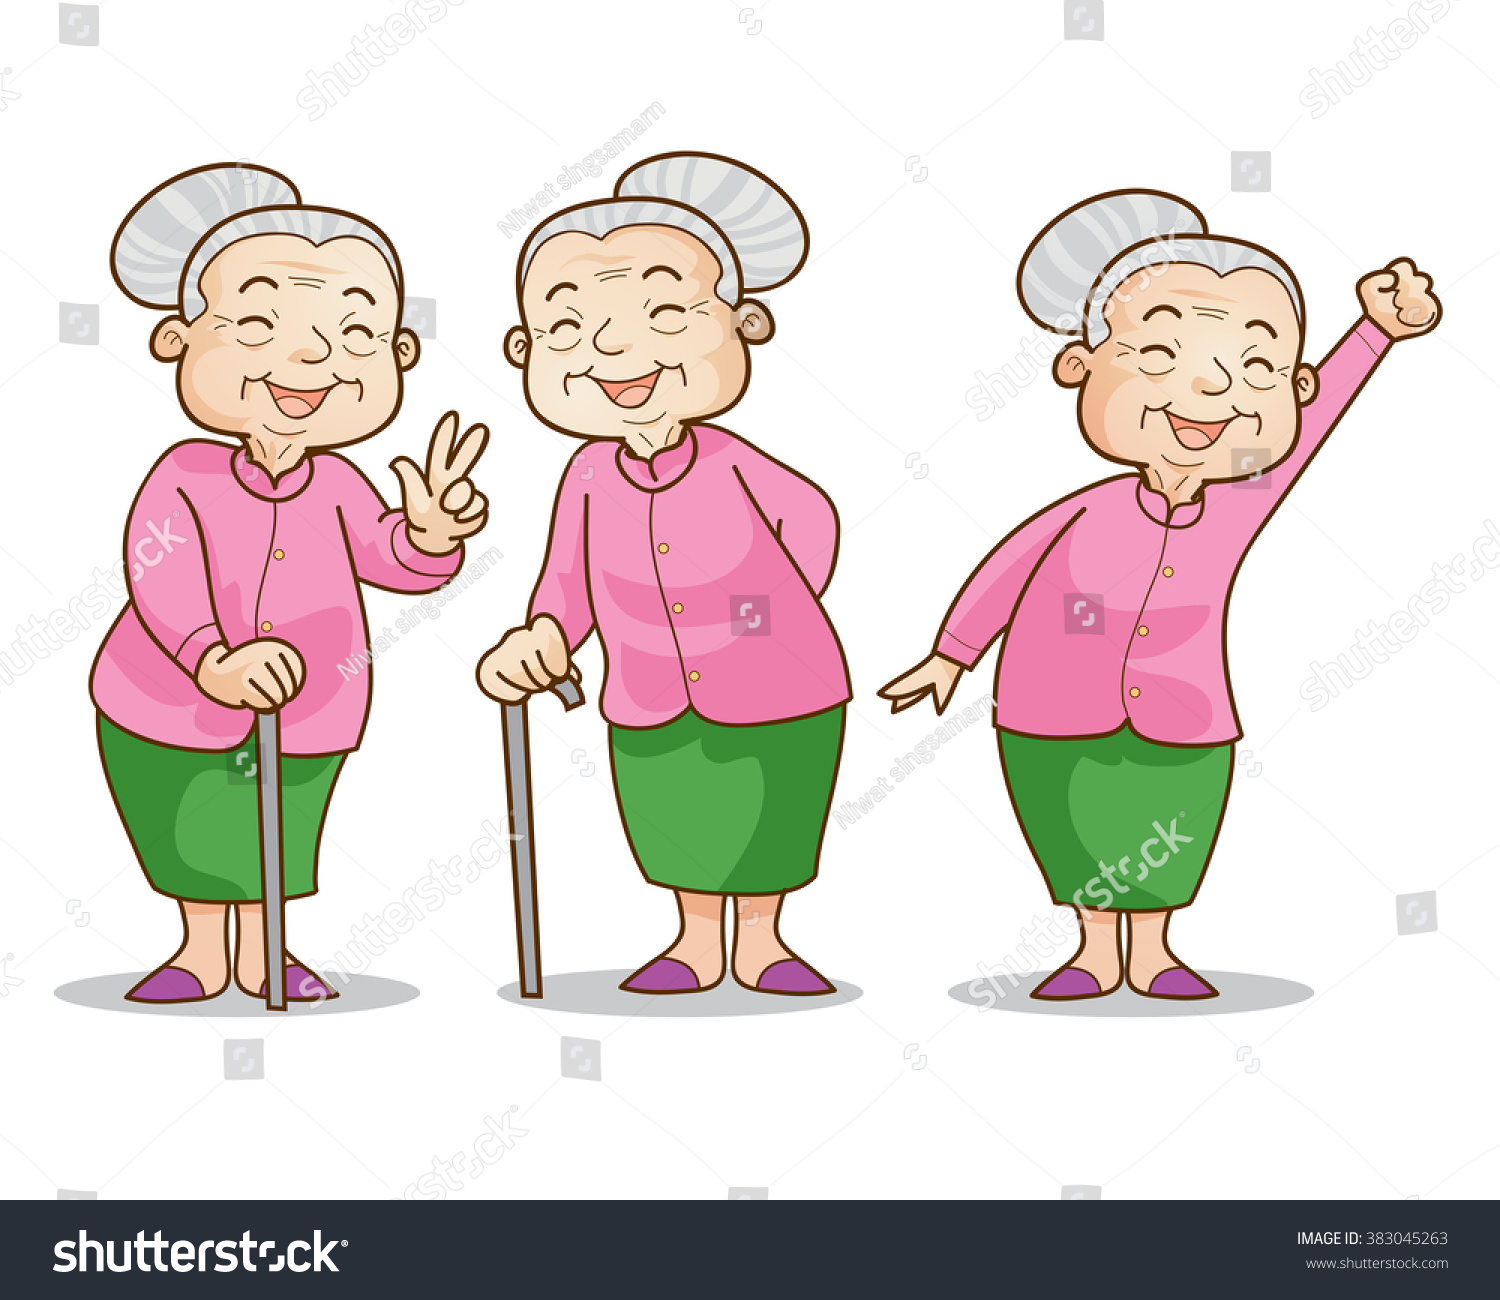 Funny Illustration Old Woman Cartoon Character Stock Vector 383045263